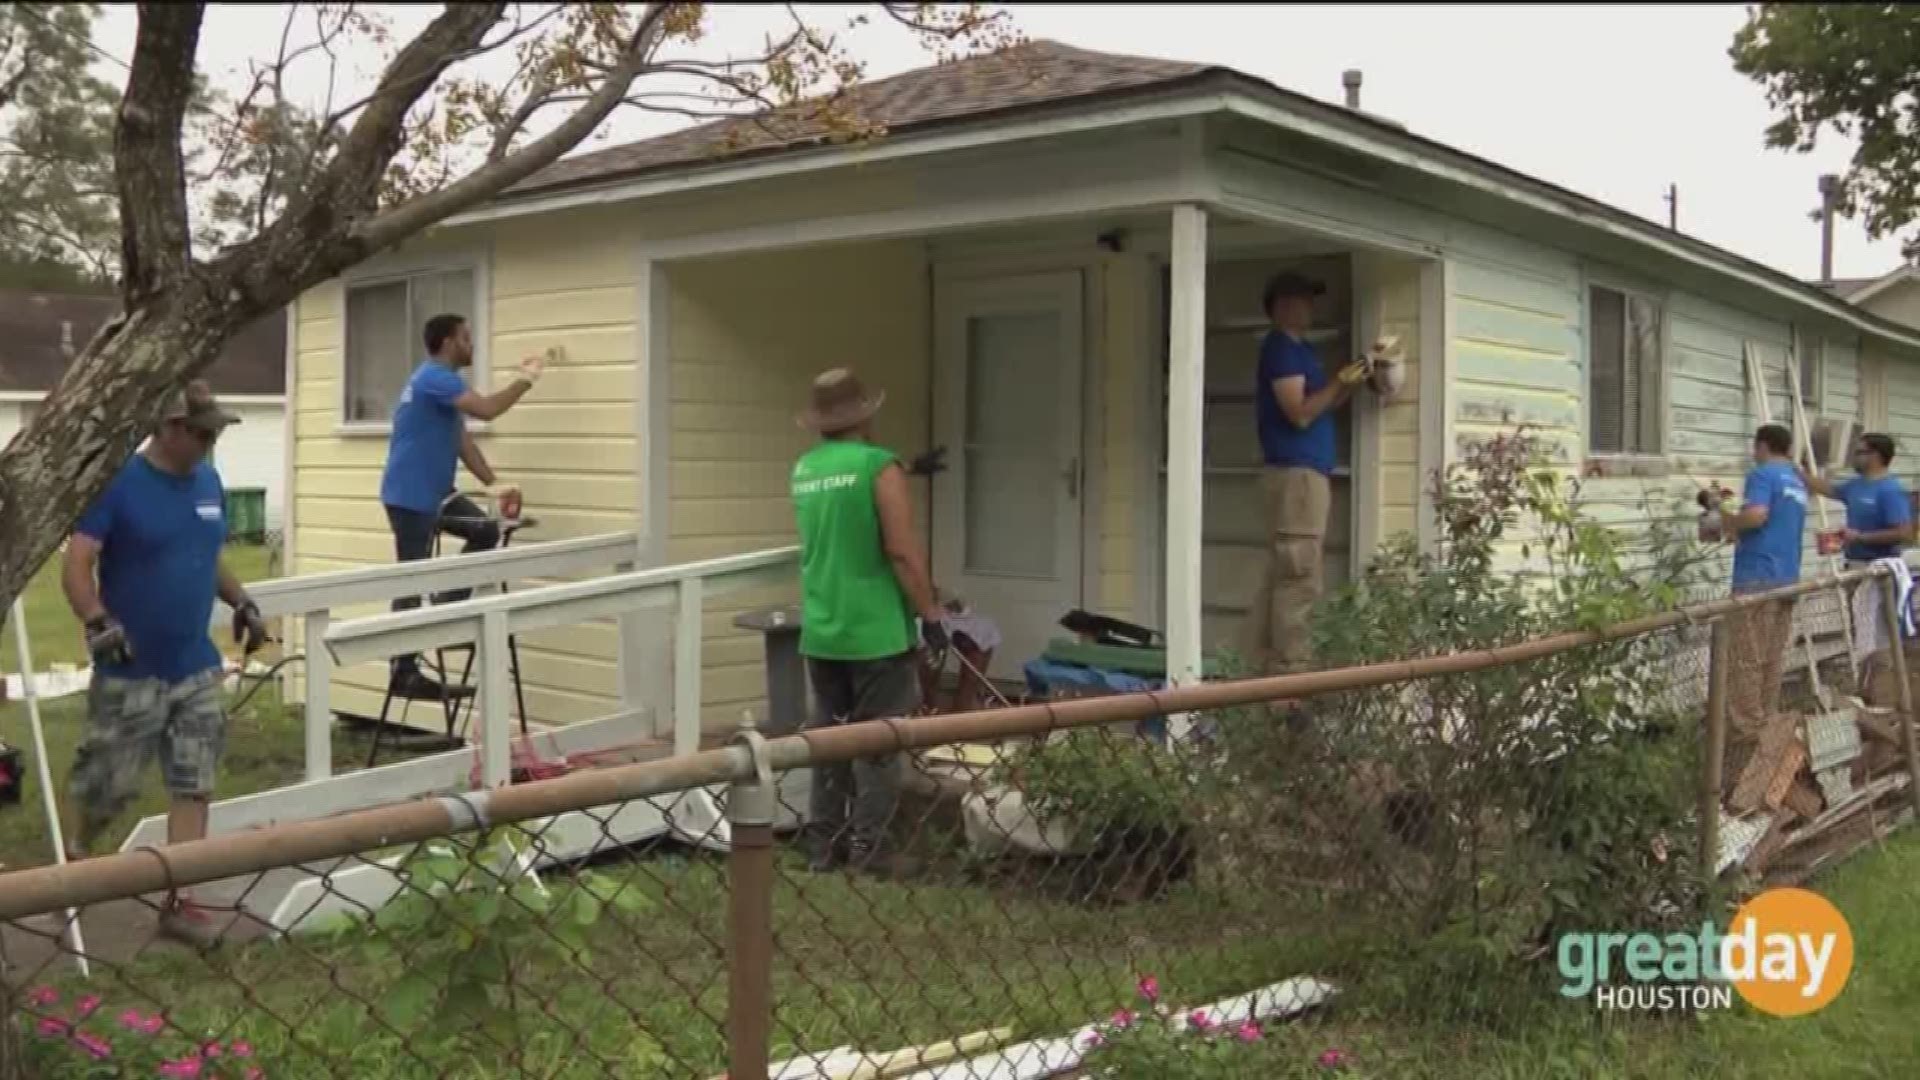 For thirty six years rebuilding together Houston repairs homes in need at no cost.  It takes an army of volunteers to make these houses a home again.  Great Day's Cristina Kooker visited a home in need to hear how we can all help.